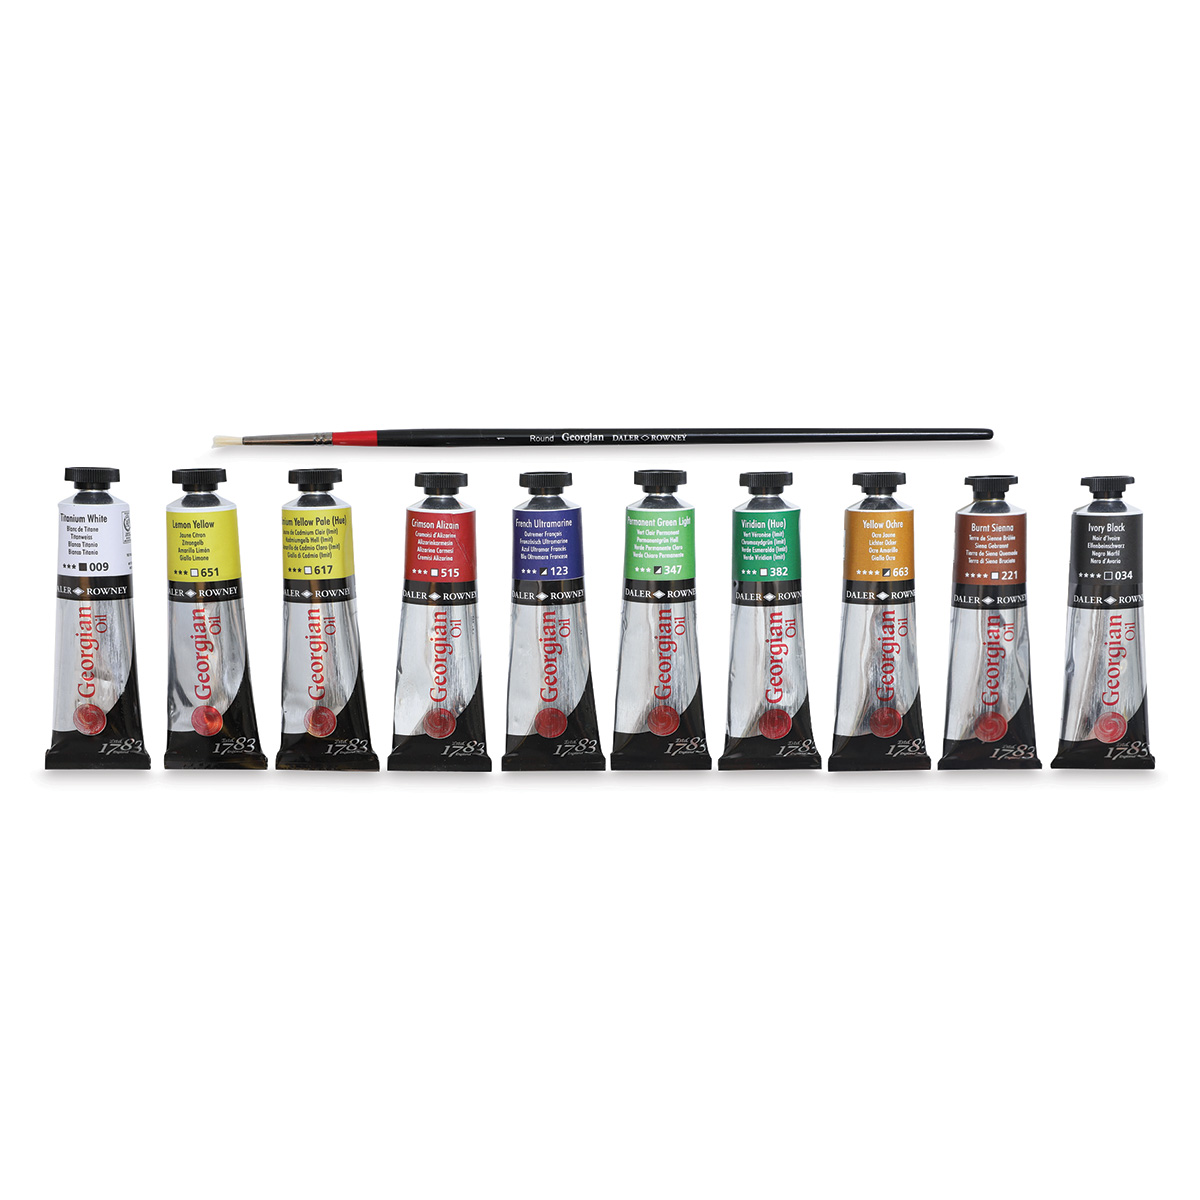  Daler Rowney Georgian 6-Tube Starter Artist Oil Paint Set -  Painting Set for Canvas Paper and More - Oil Painting Supplies for Artists  and Students - Artist Oil Paints for All